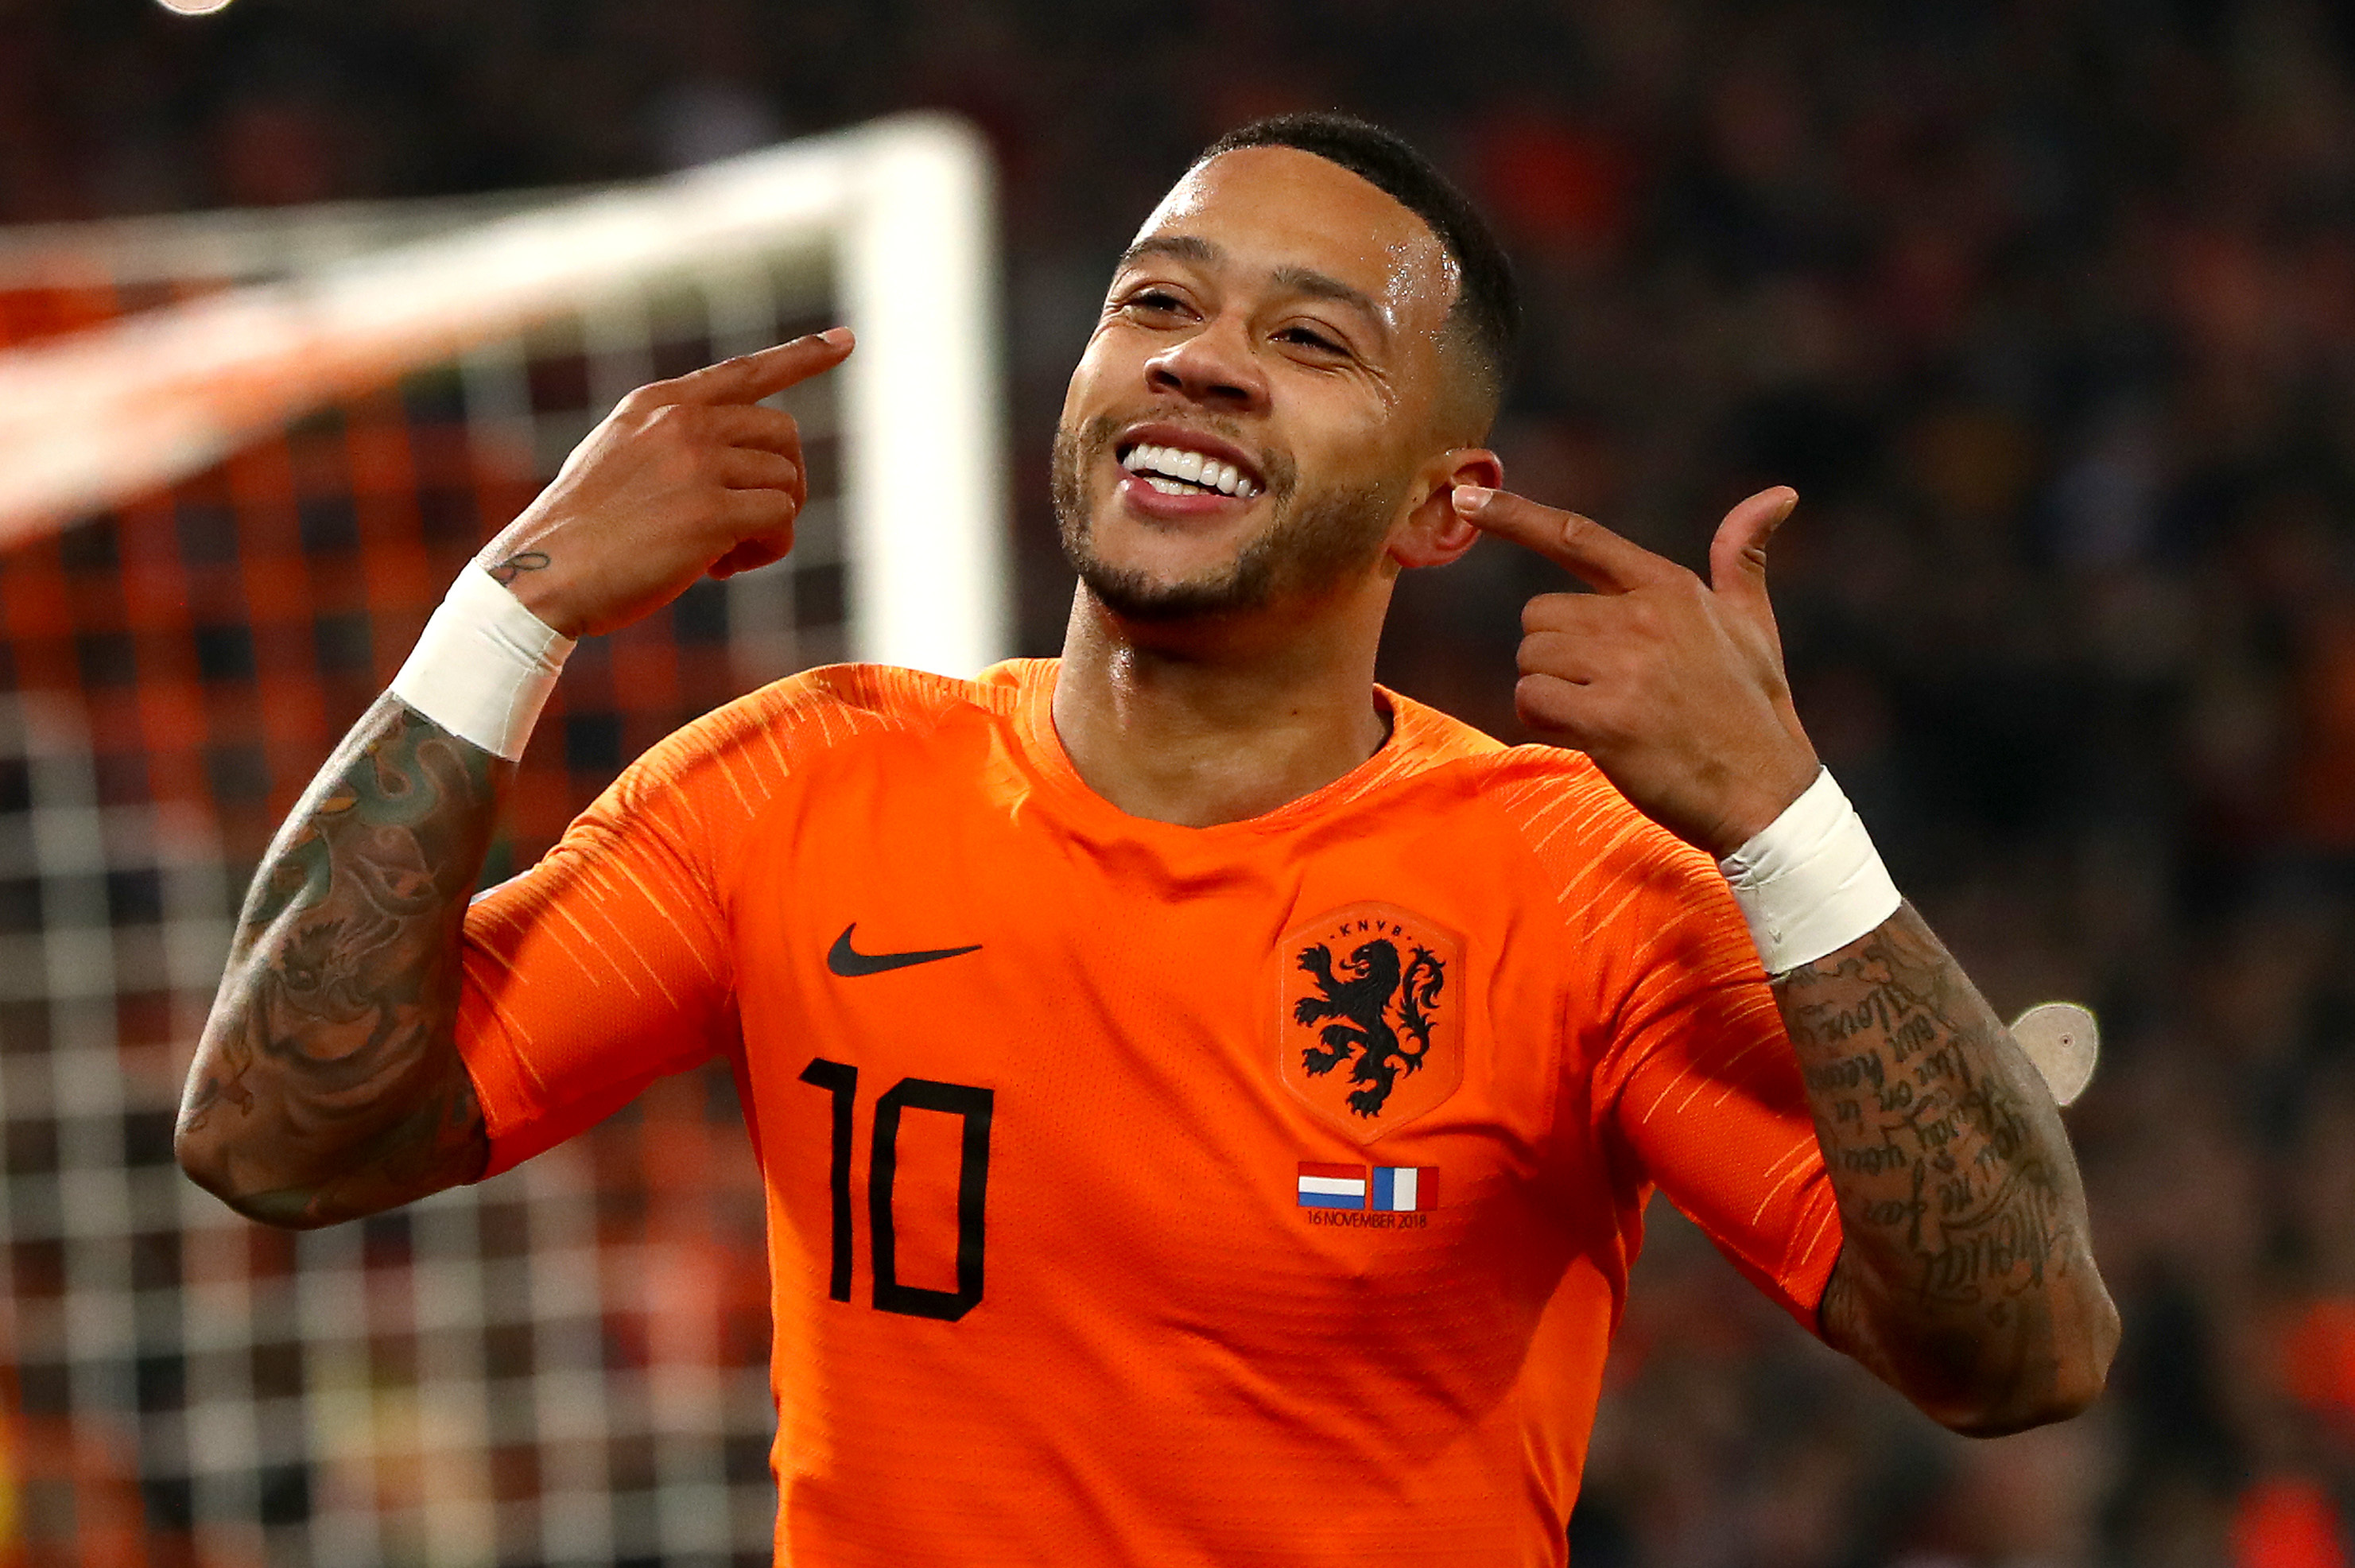 Memphis Depay on X: Happy birthday to a Cool person and a